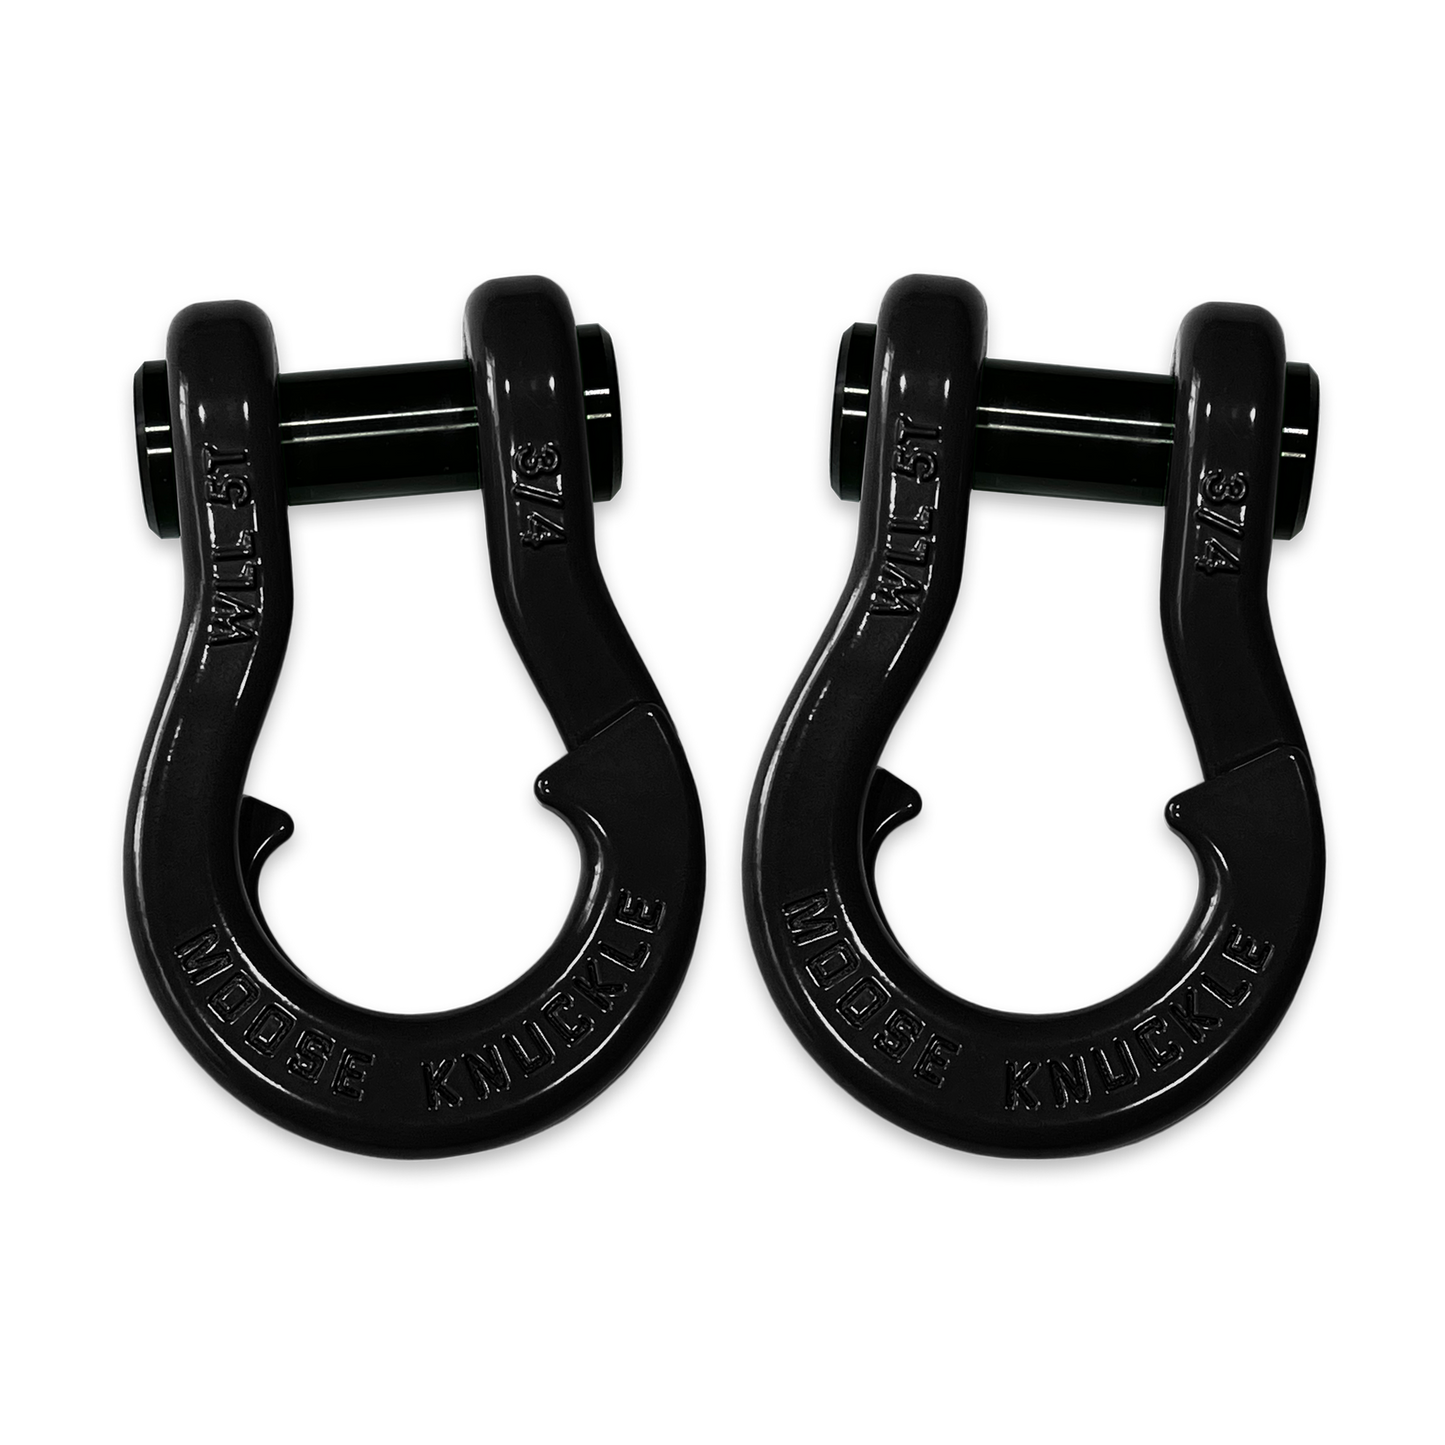 Moose Knuckle's Jowl Recovery Split Shackle 3/4 in Black Hole and Black Hole Combo